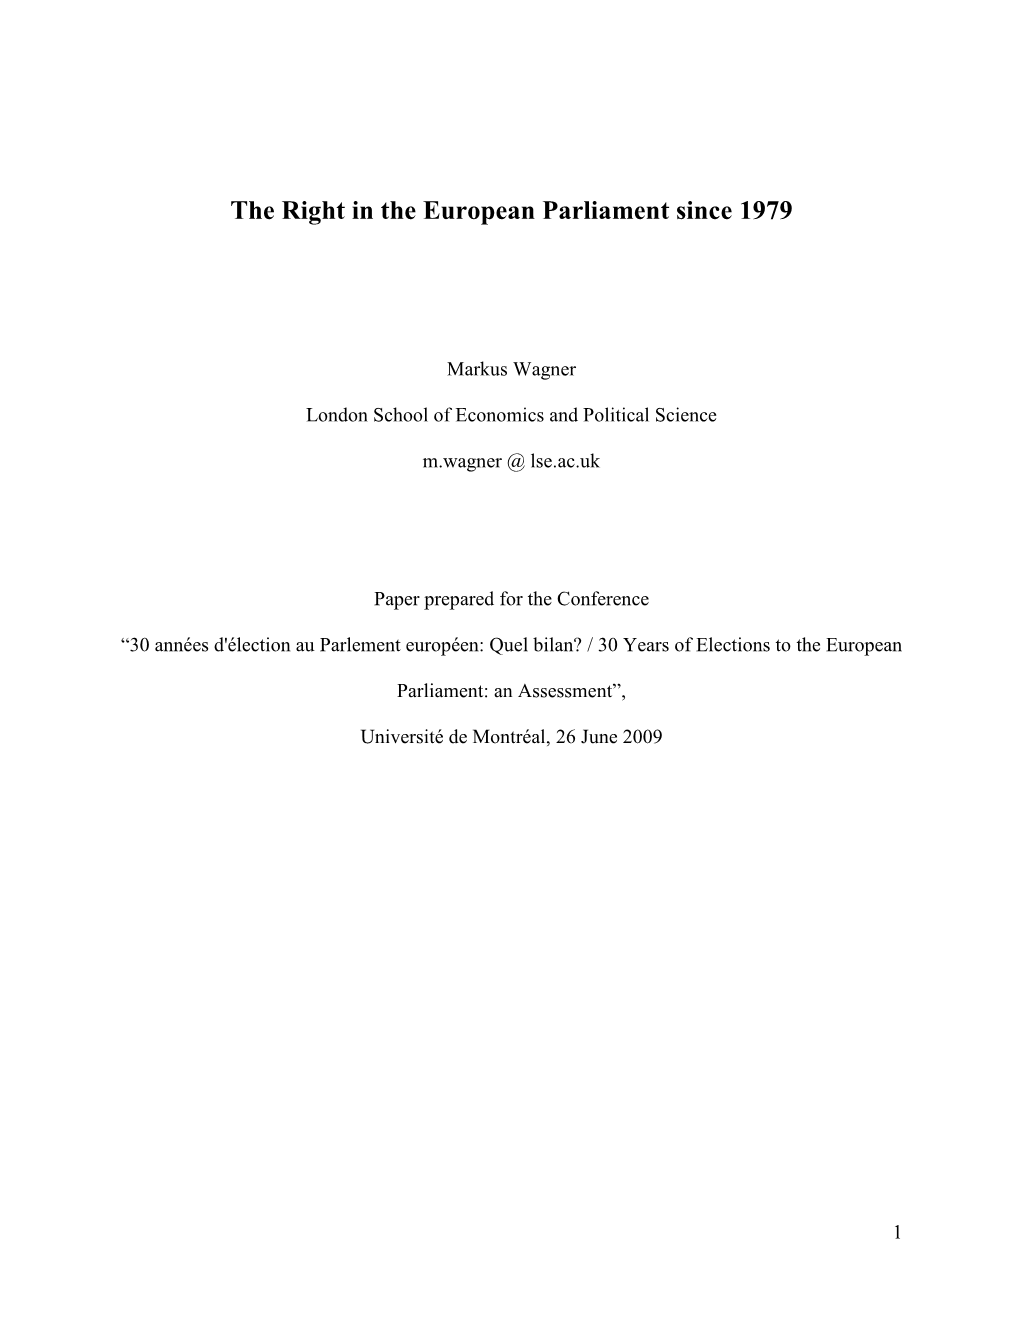 The Right in the European Parliament Since 1979